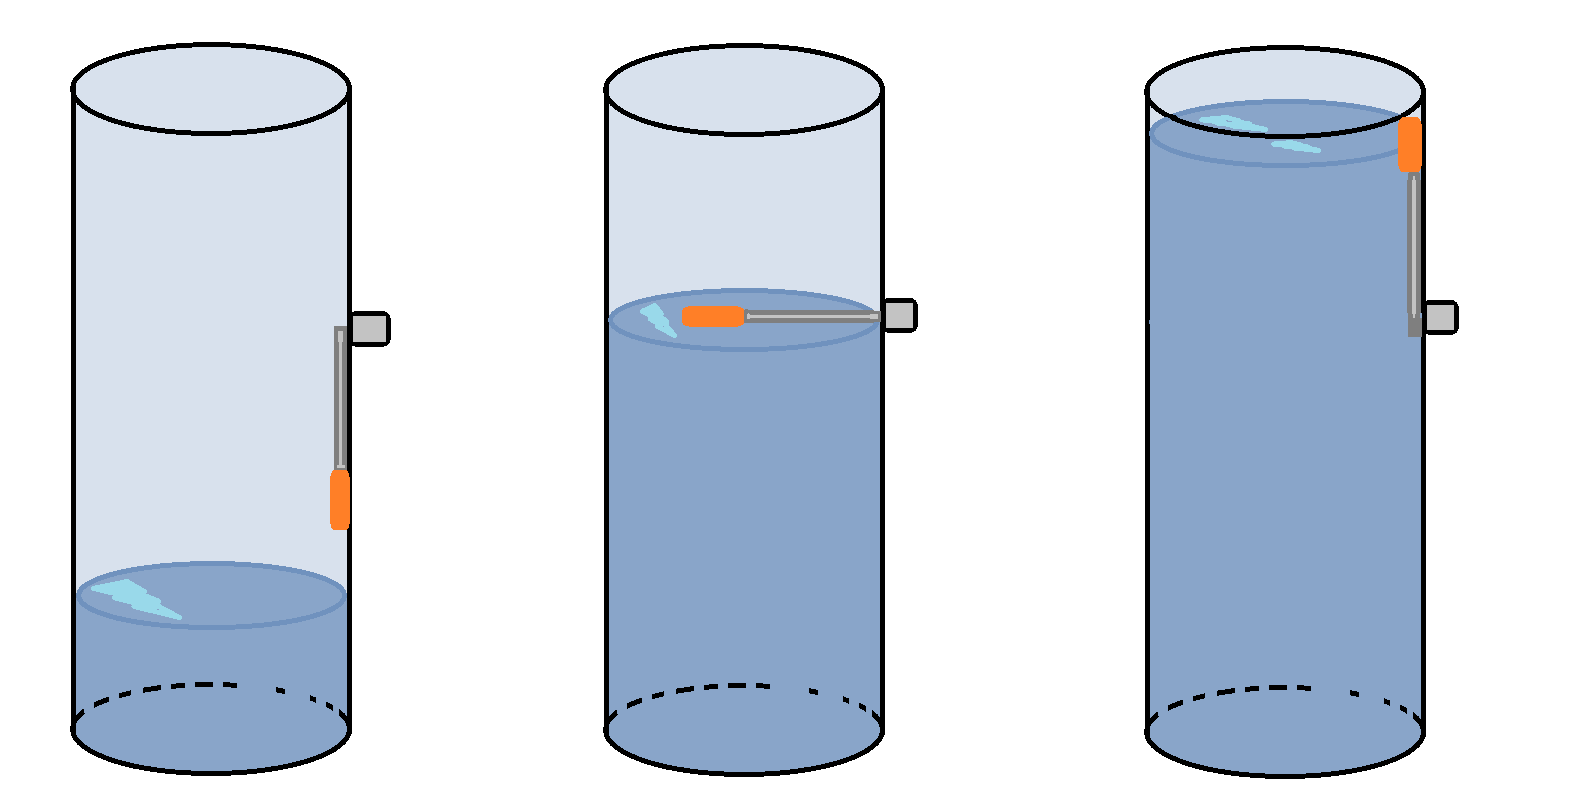 The water level rising at different stages from left to right. The floater is the orange circle and it moves to depend on the level of the water.